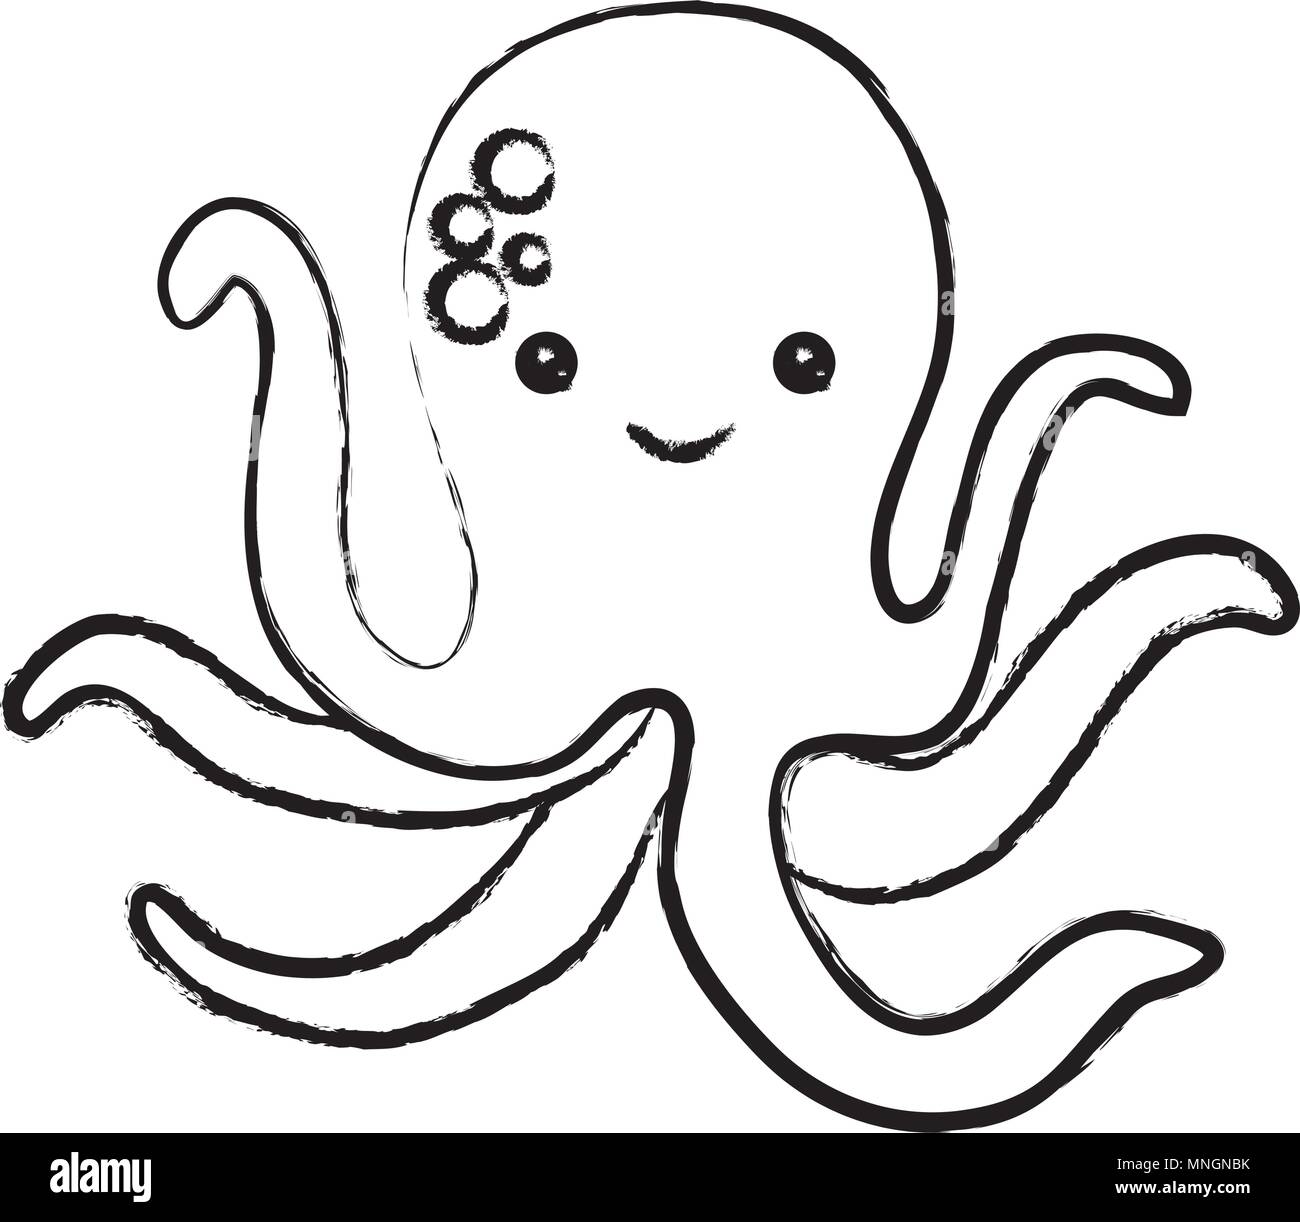 sketch of cute octopus icon over white background, vector illustration ...